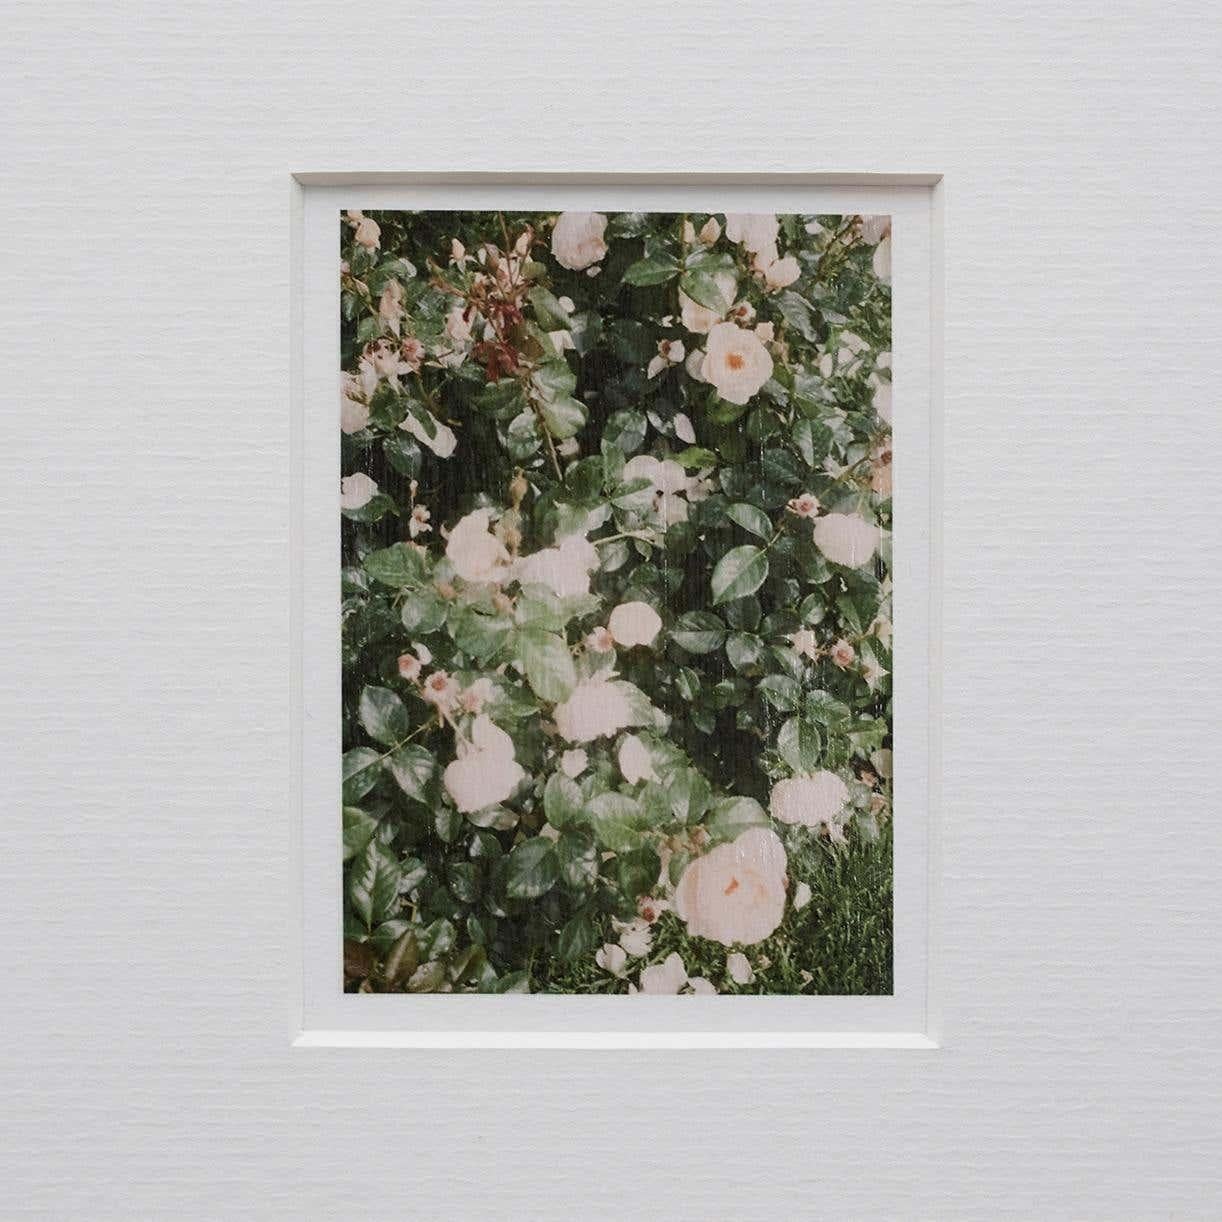 Spanish David Urbano Contemporary Color Limited Edition Photography the Rose Garden N44 For Sale